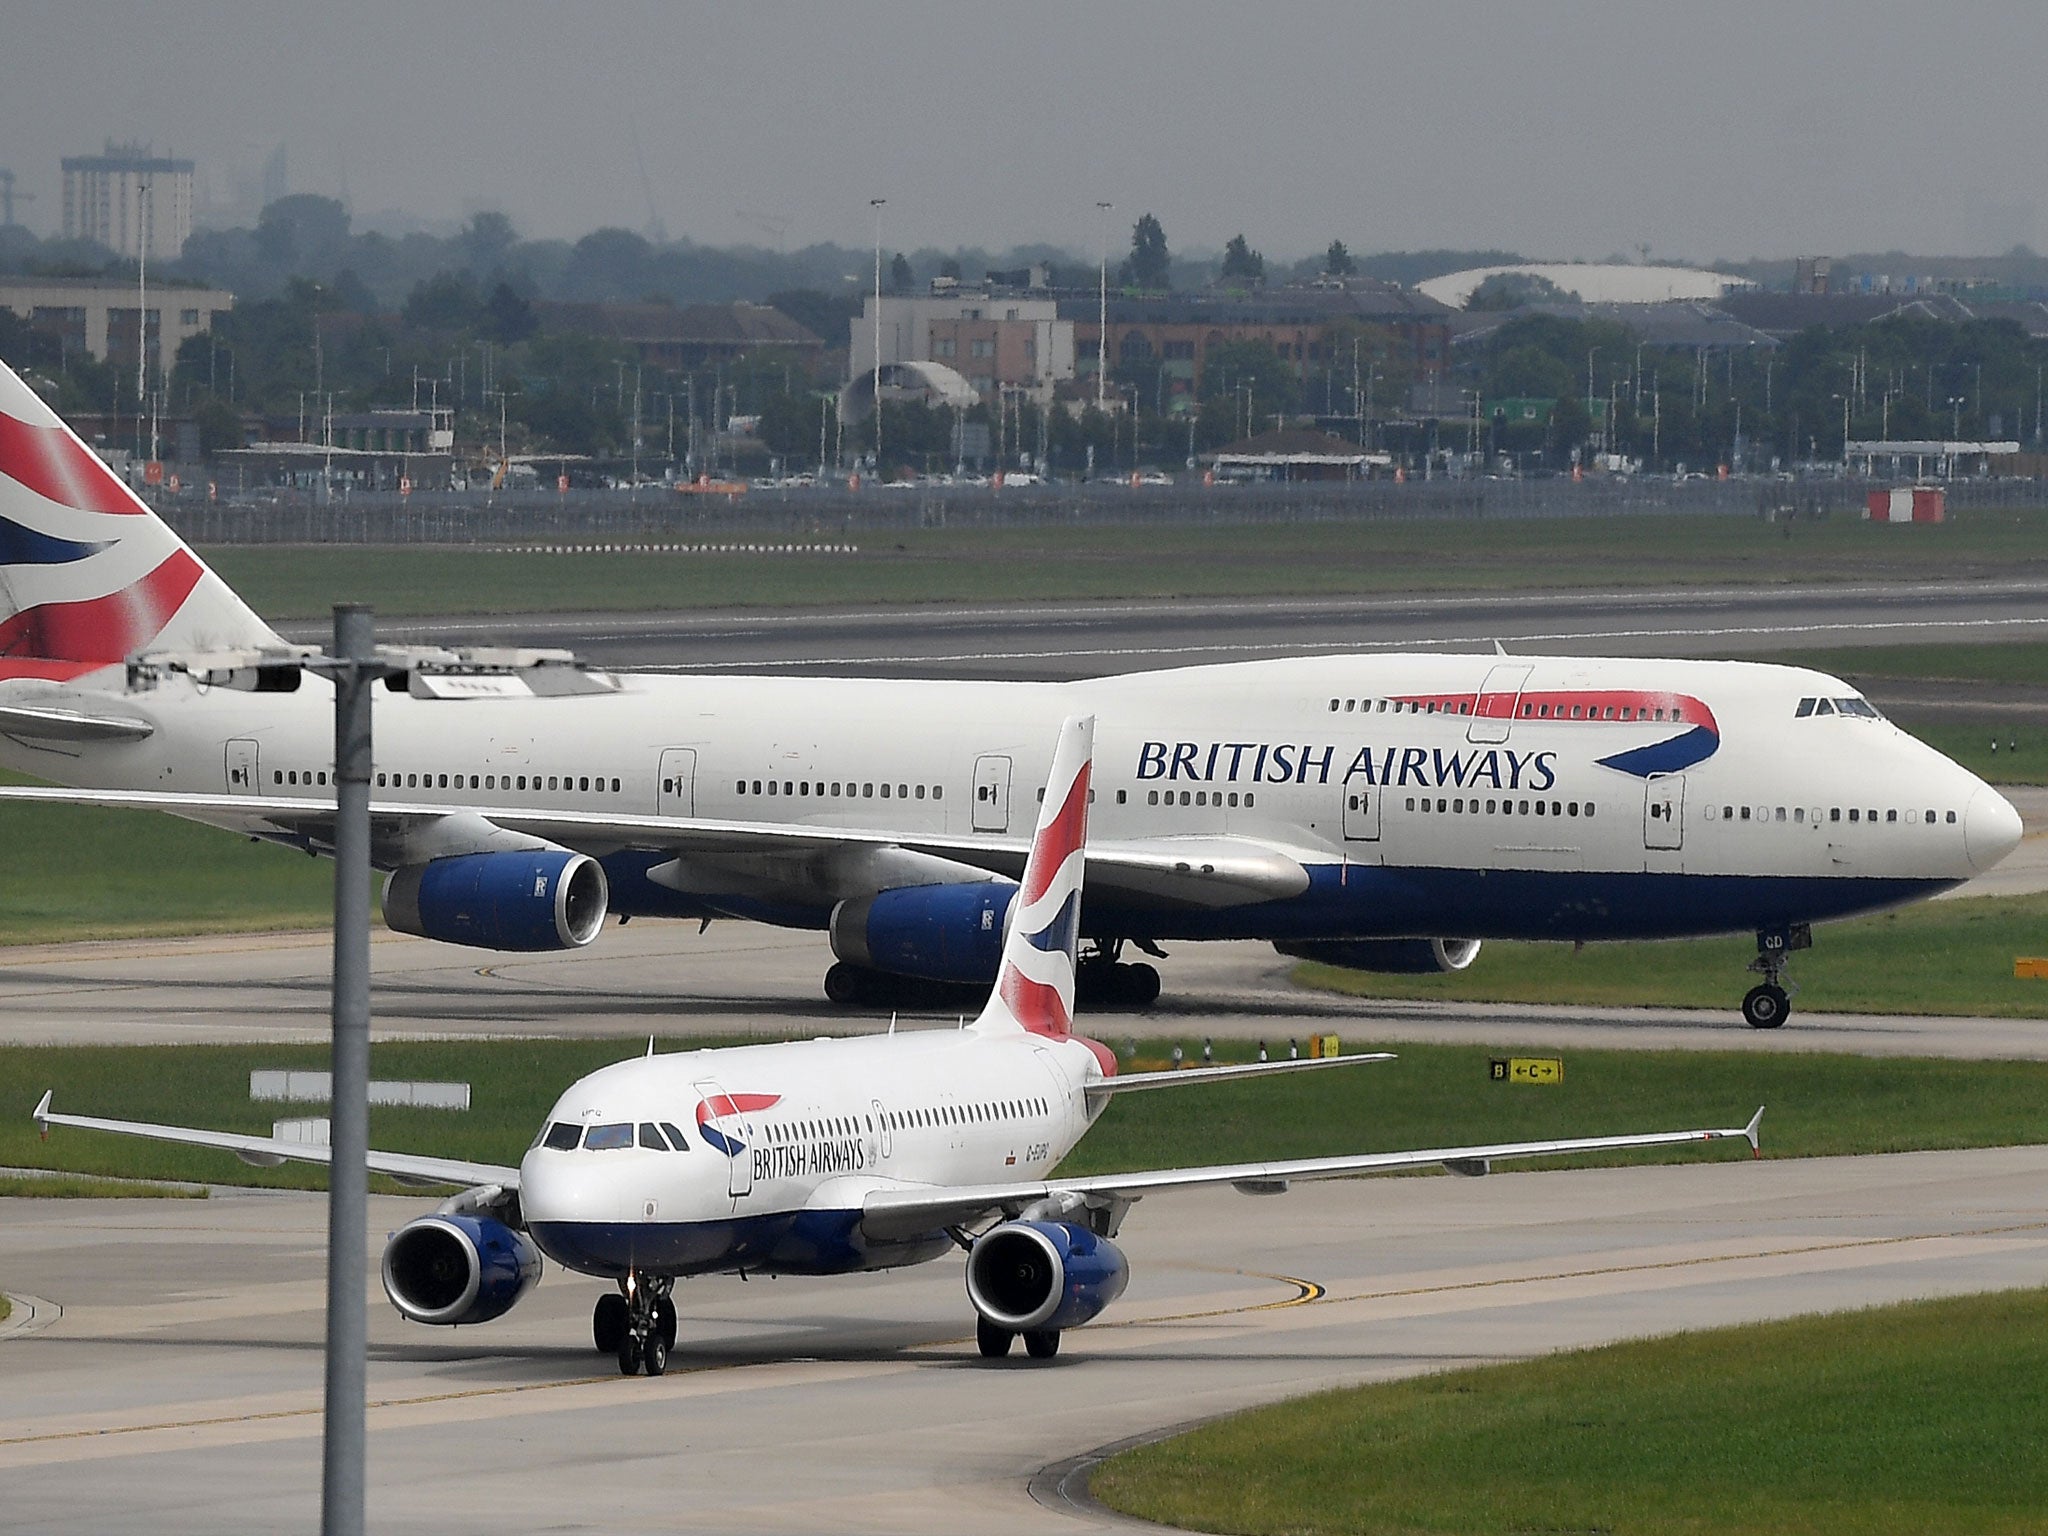 'It is a constant frustration to us and to our customers that after a long flight they have to stand in queues, sometimes for over an hour, just to get back into the country,' BA says